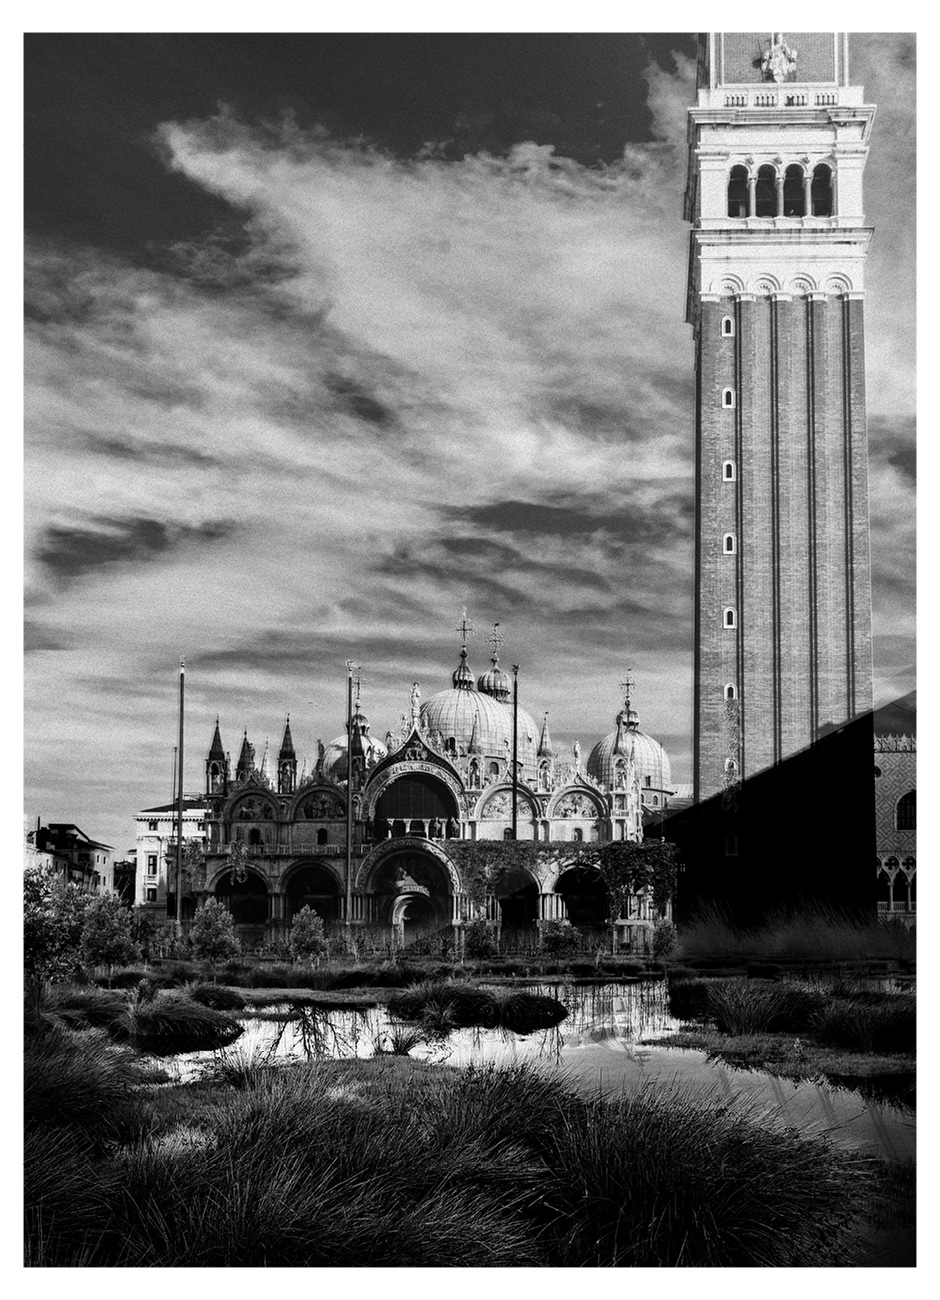 Black and white image of Venice